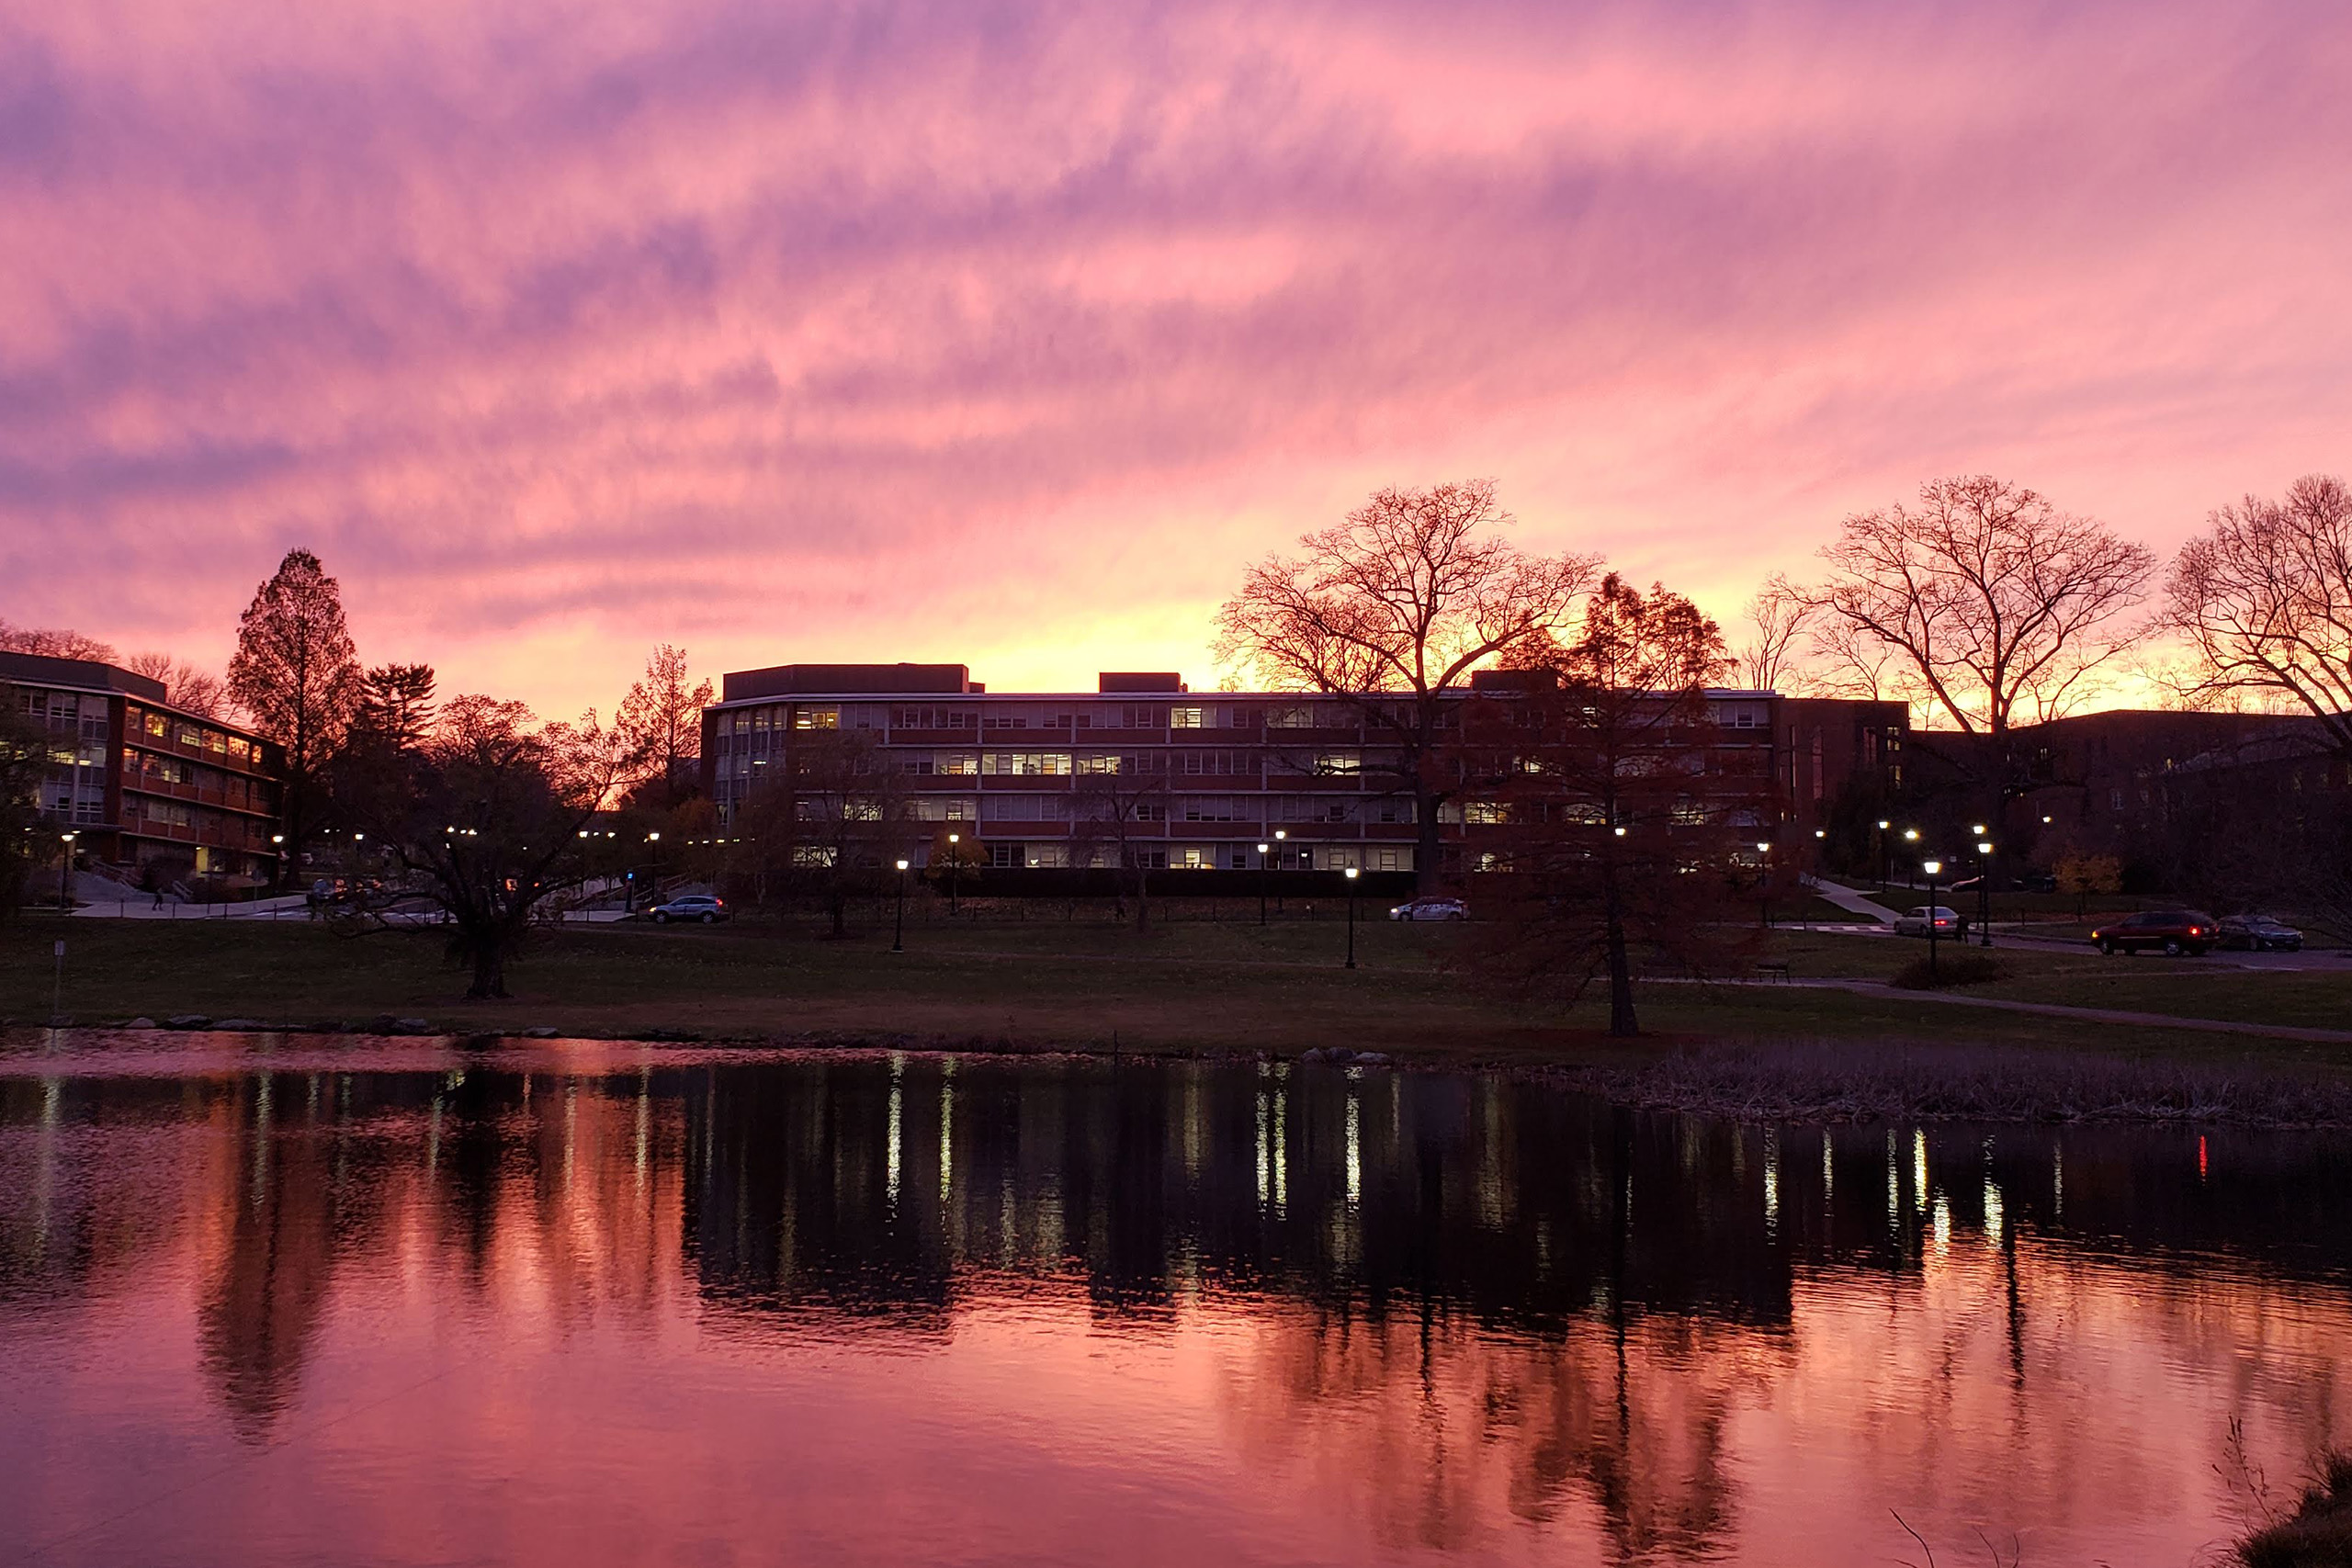 Monteith Hall, exterior at sunset, reflecting in Mirror Lake.